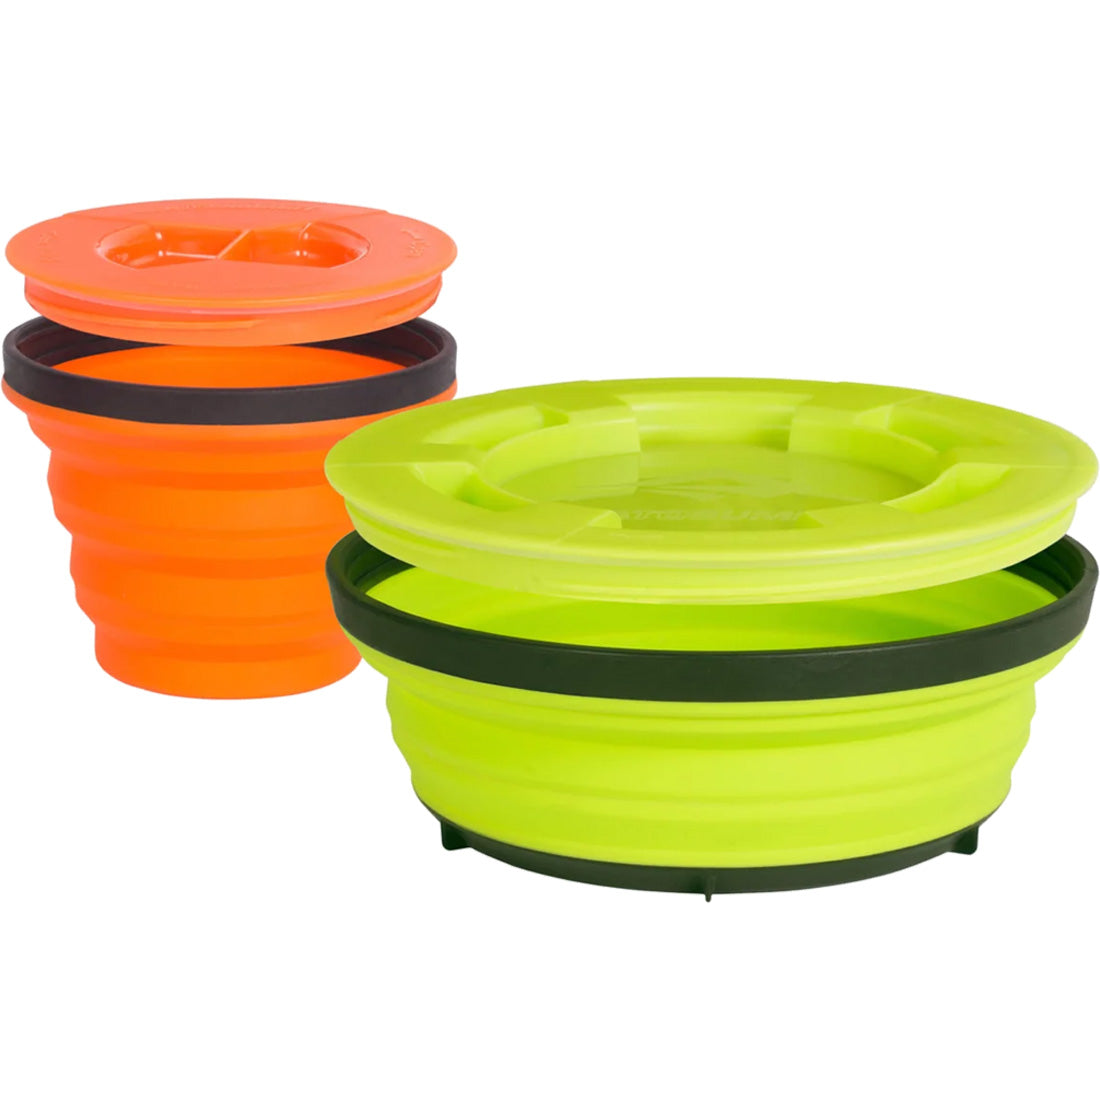 Sea to Summit X-Seal And Go Food Container Set, Orange/Lime